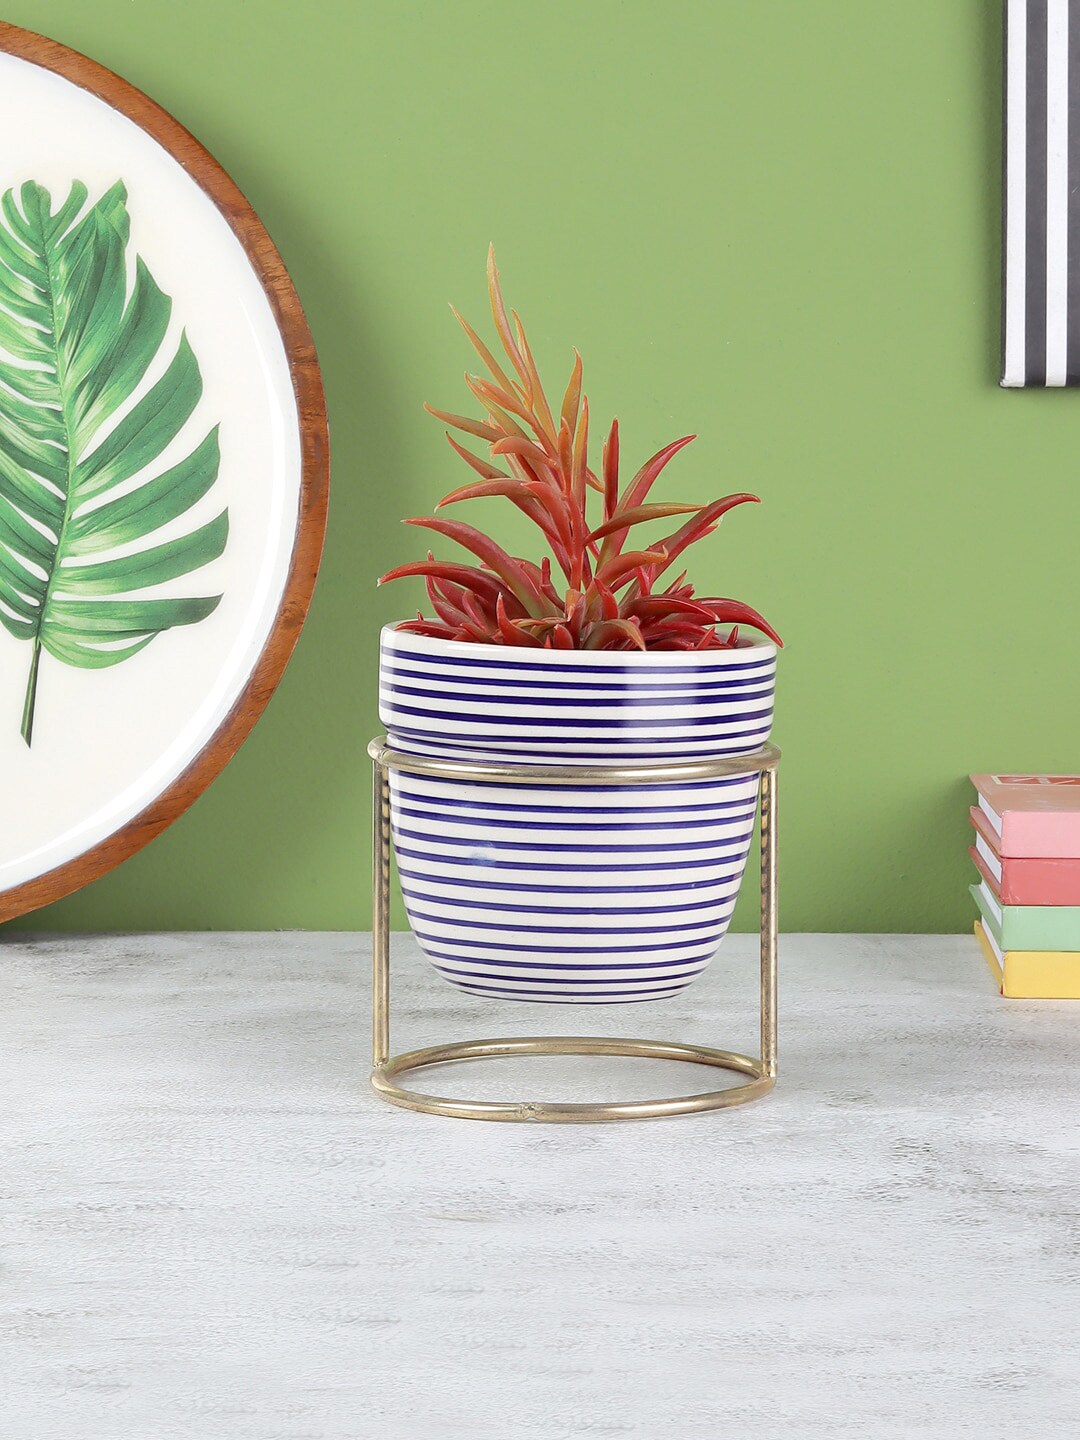 VarEesha Blue Spiral Ceramic Planter with Stand Price in India